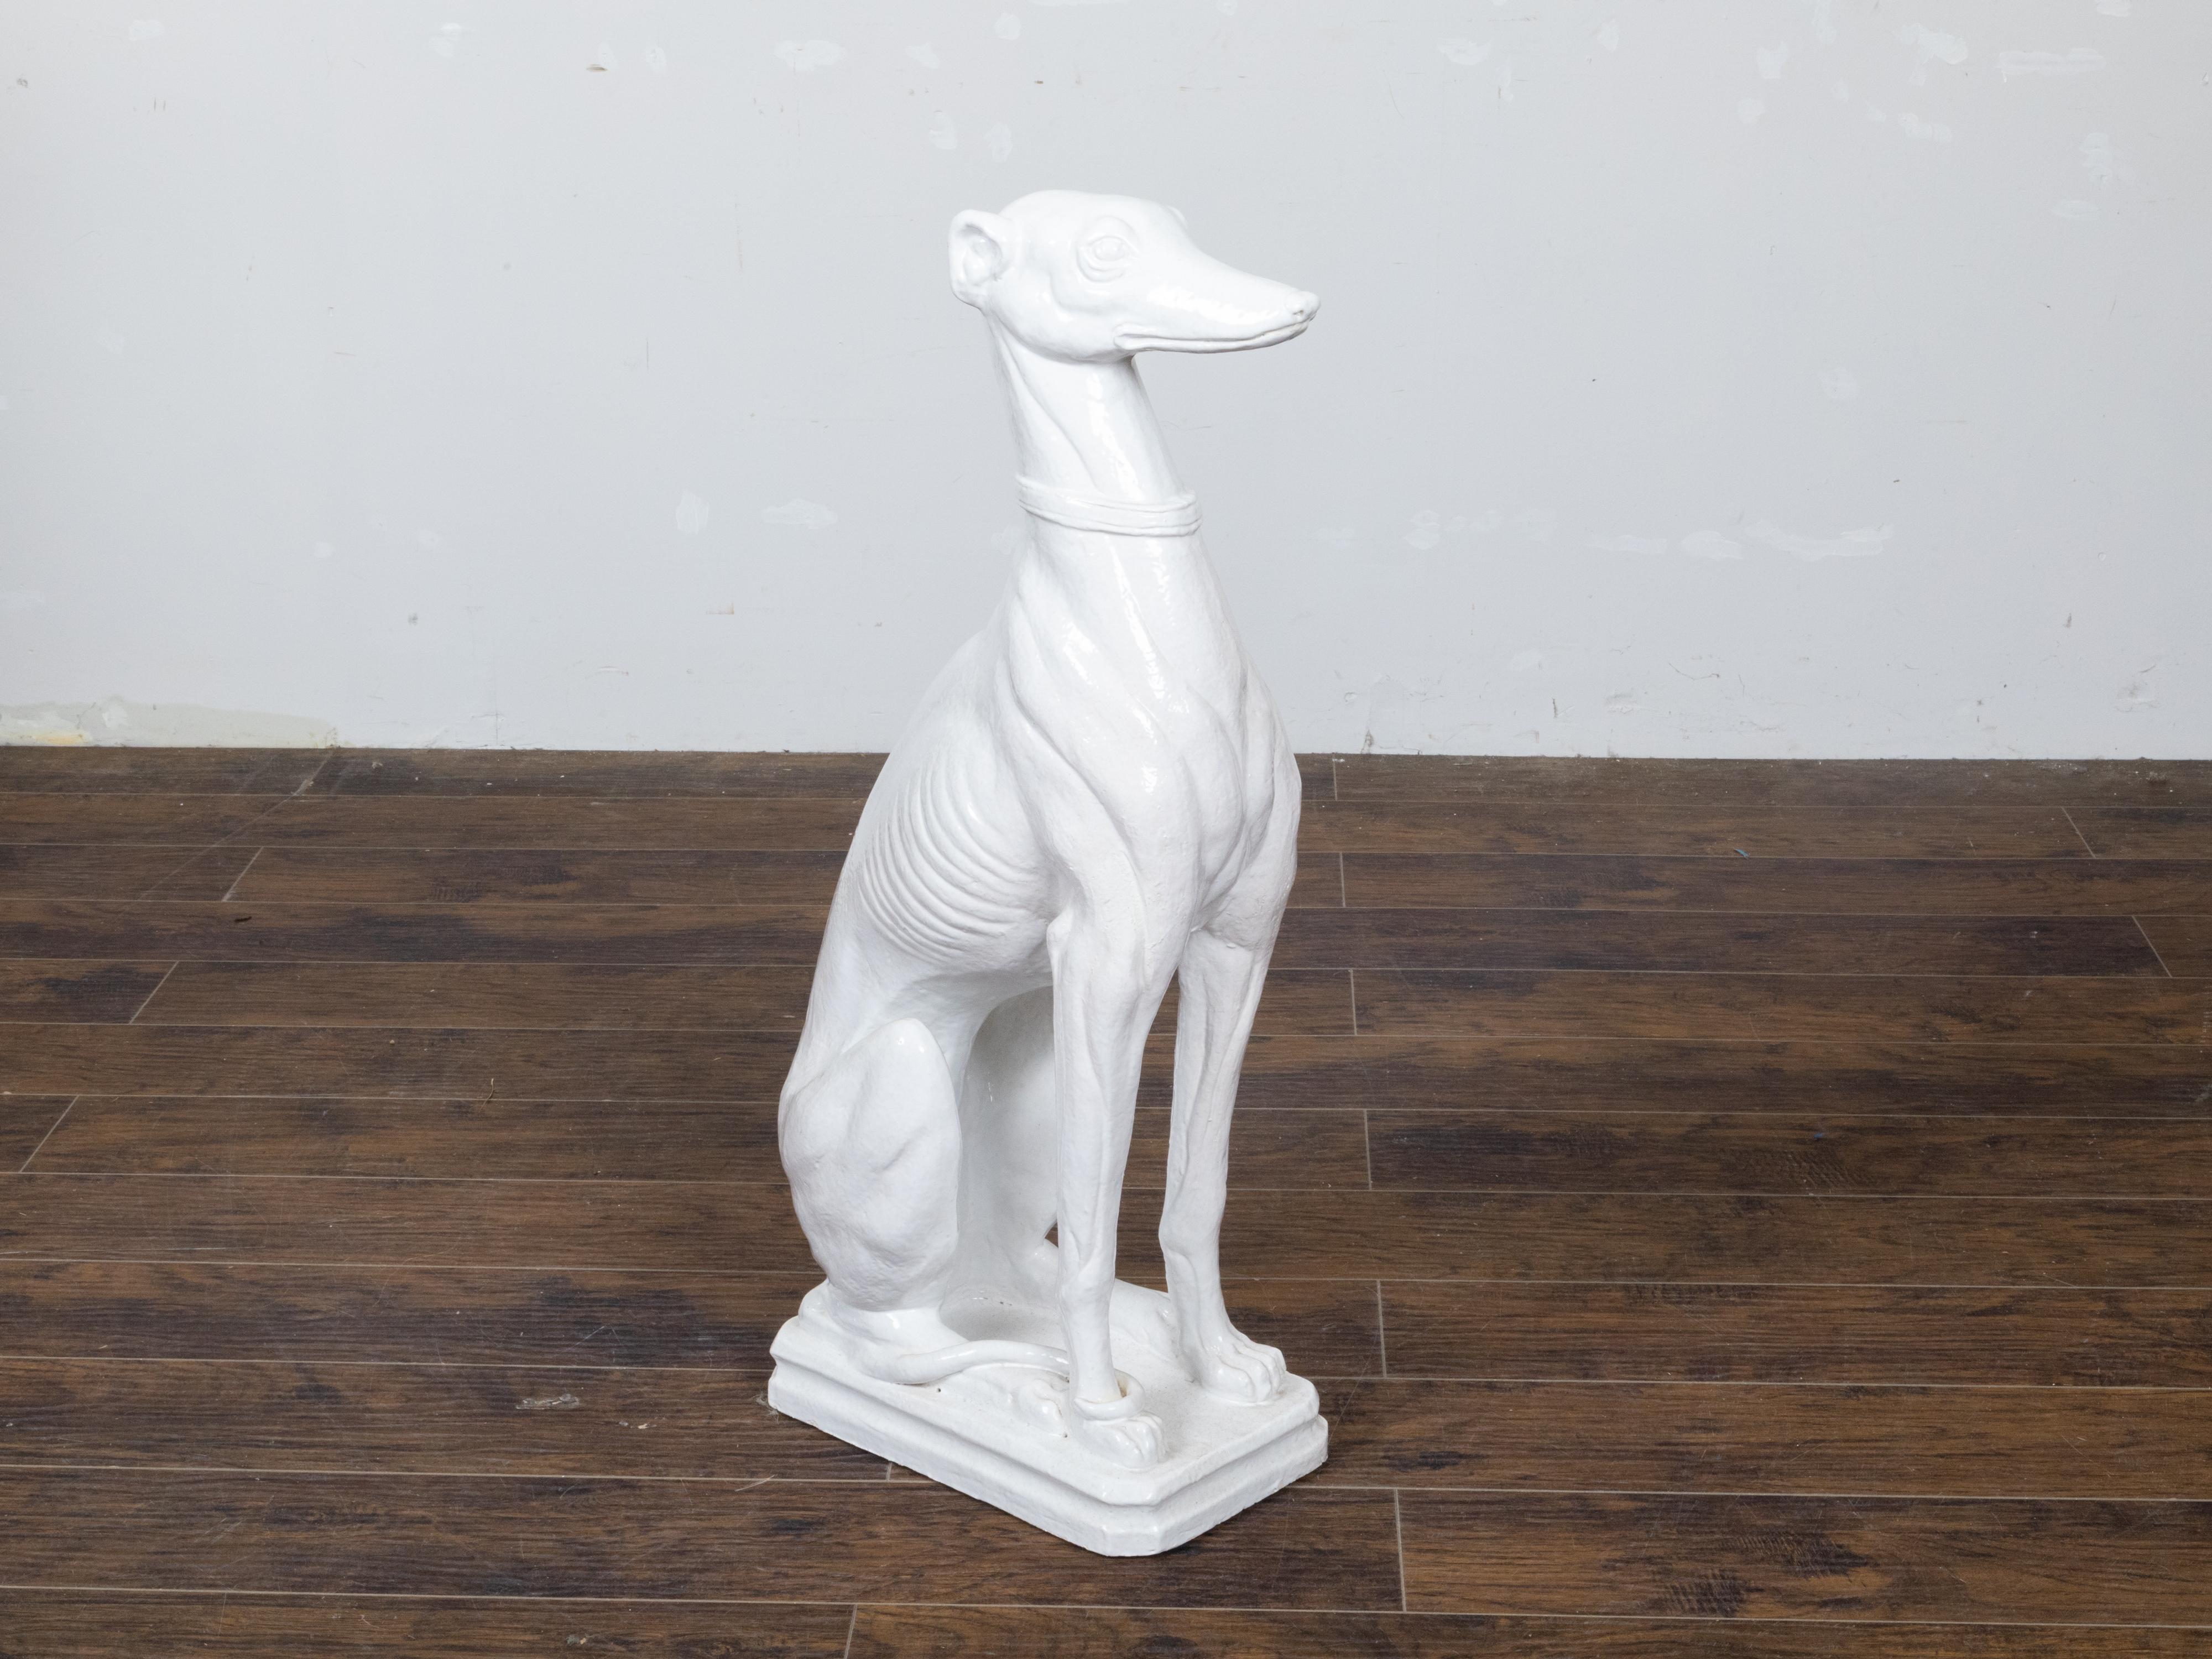 A vintage Italian Midcentury white porcelain sculpture depicting a greyhound dog sitting obediently on his behind. Lend an air of elegance to your space with this vintage Italian Midcentury white porcelain sculpture, artfully depicting an obedient